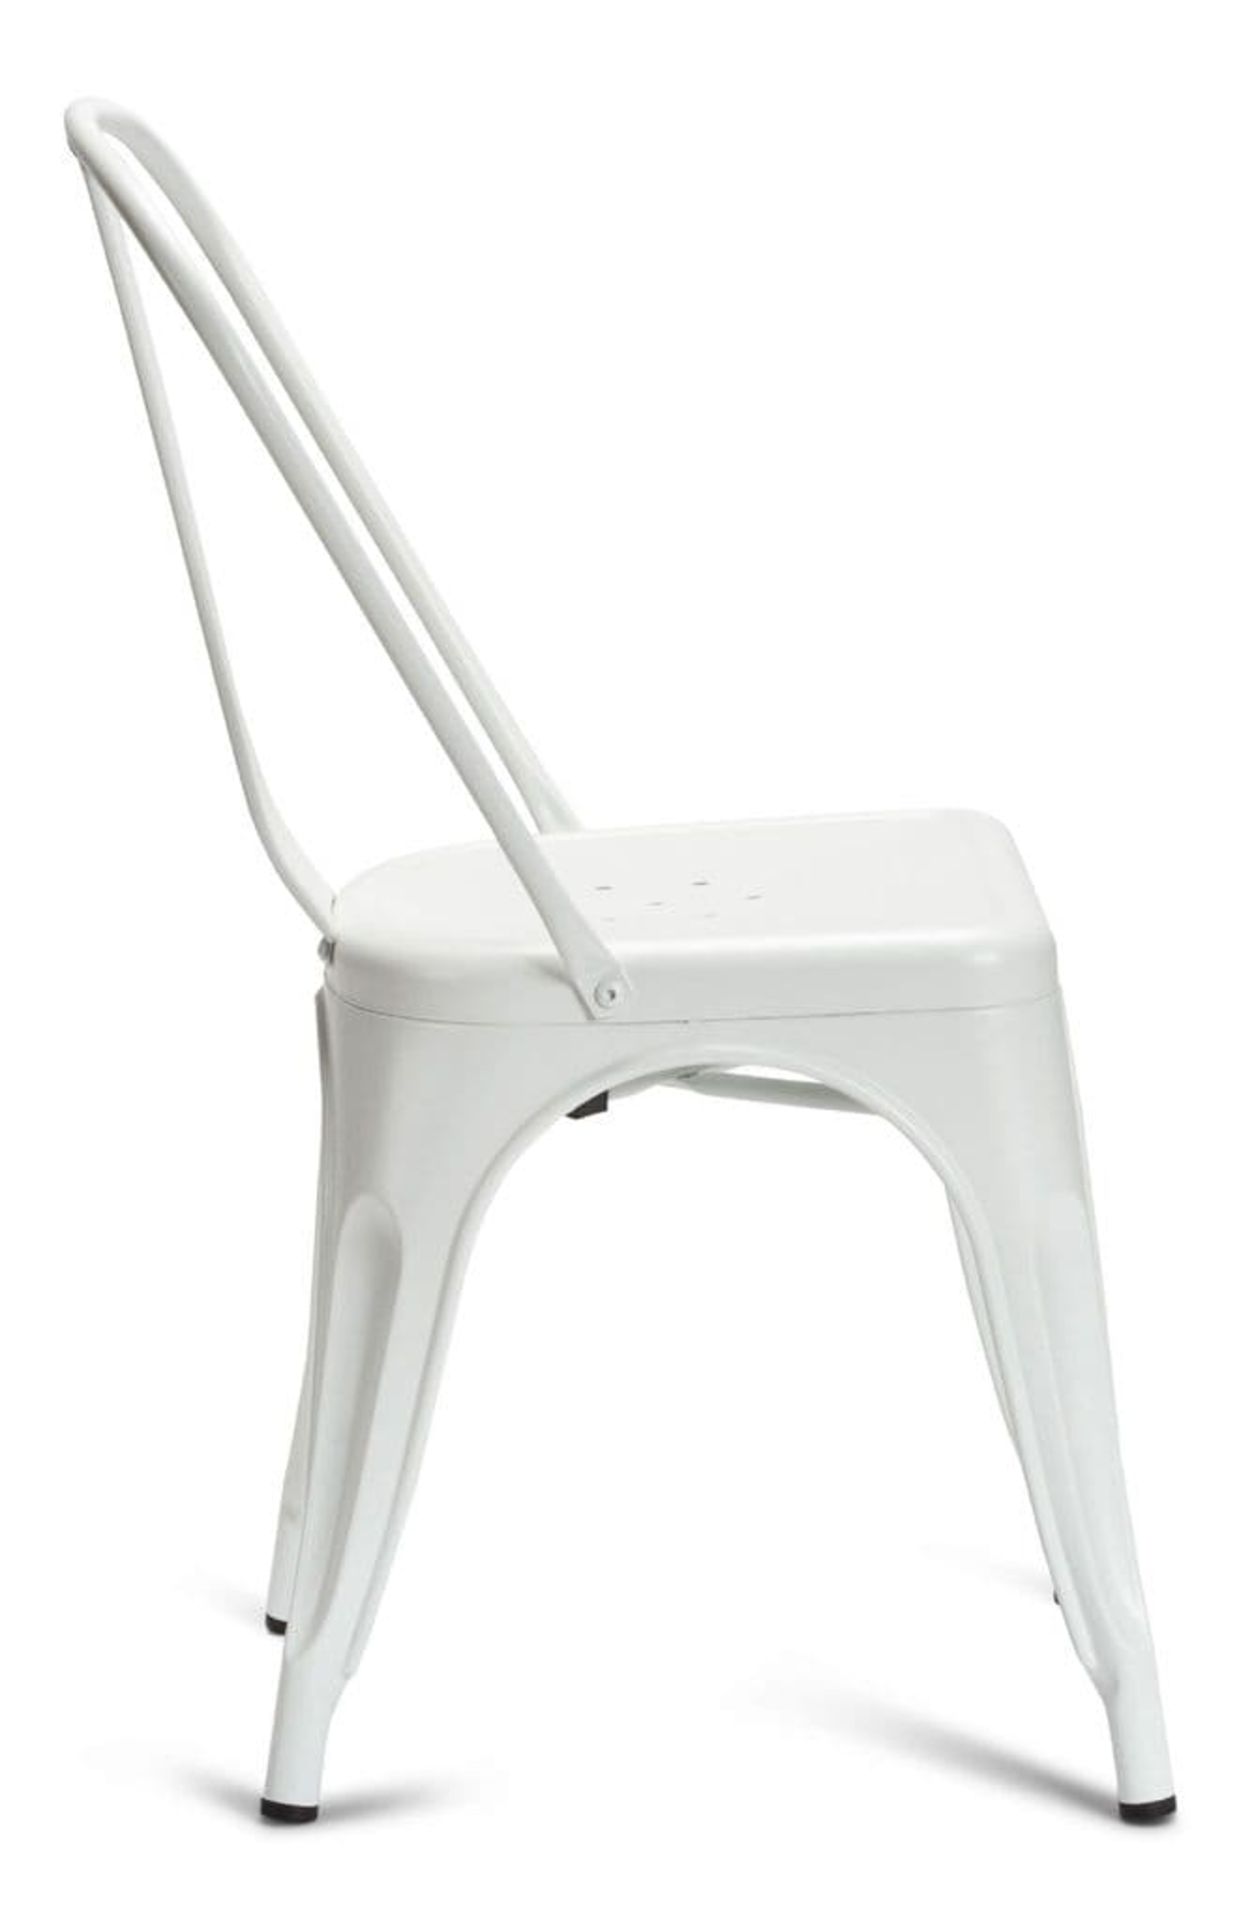 1 x Tolix Industrial Style Outdoor Bistro Table and Chair Set in White- Includes 1 x Table and 4 x - Image 6 of 13